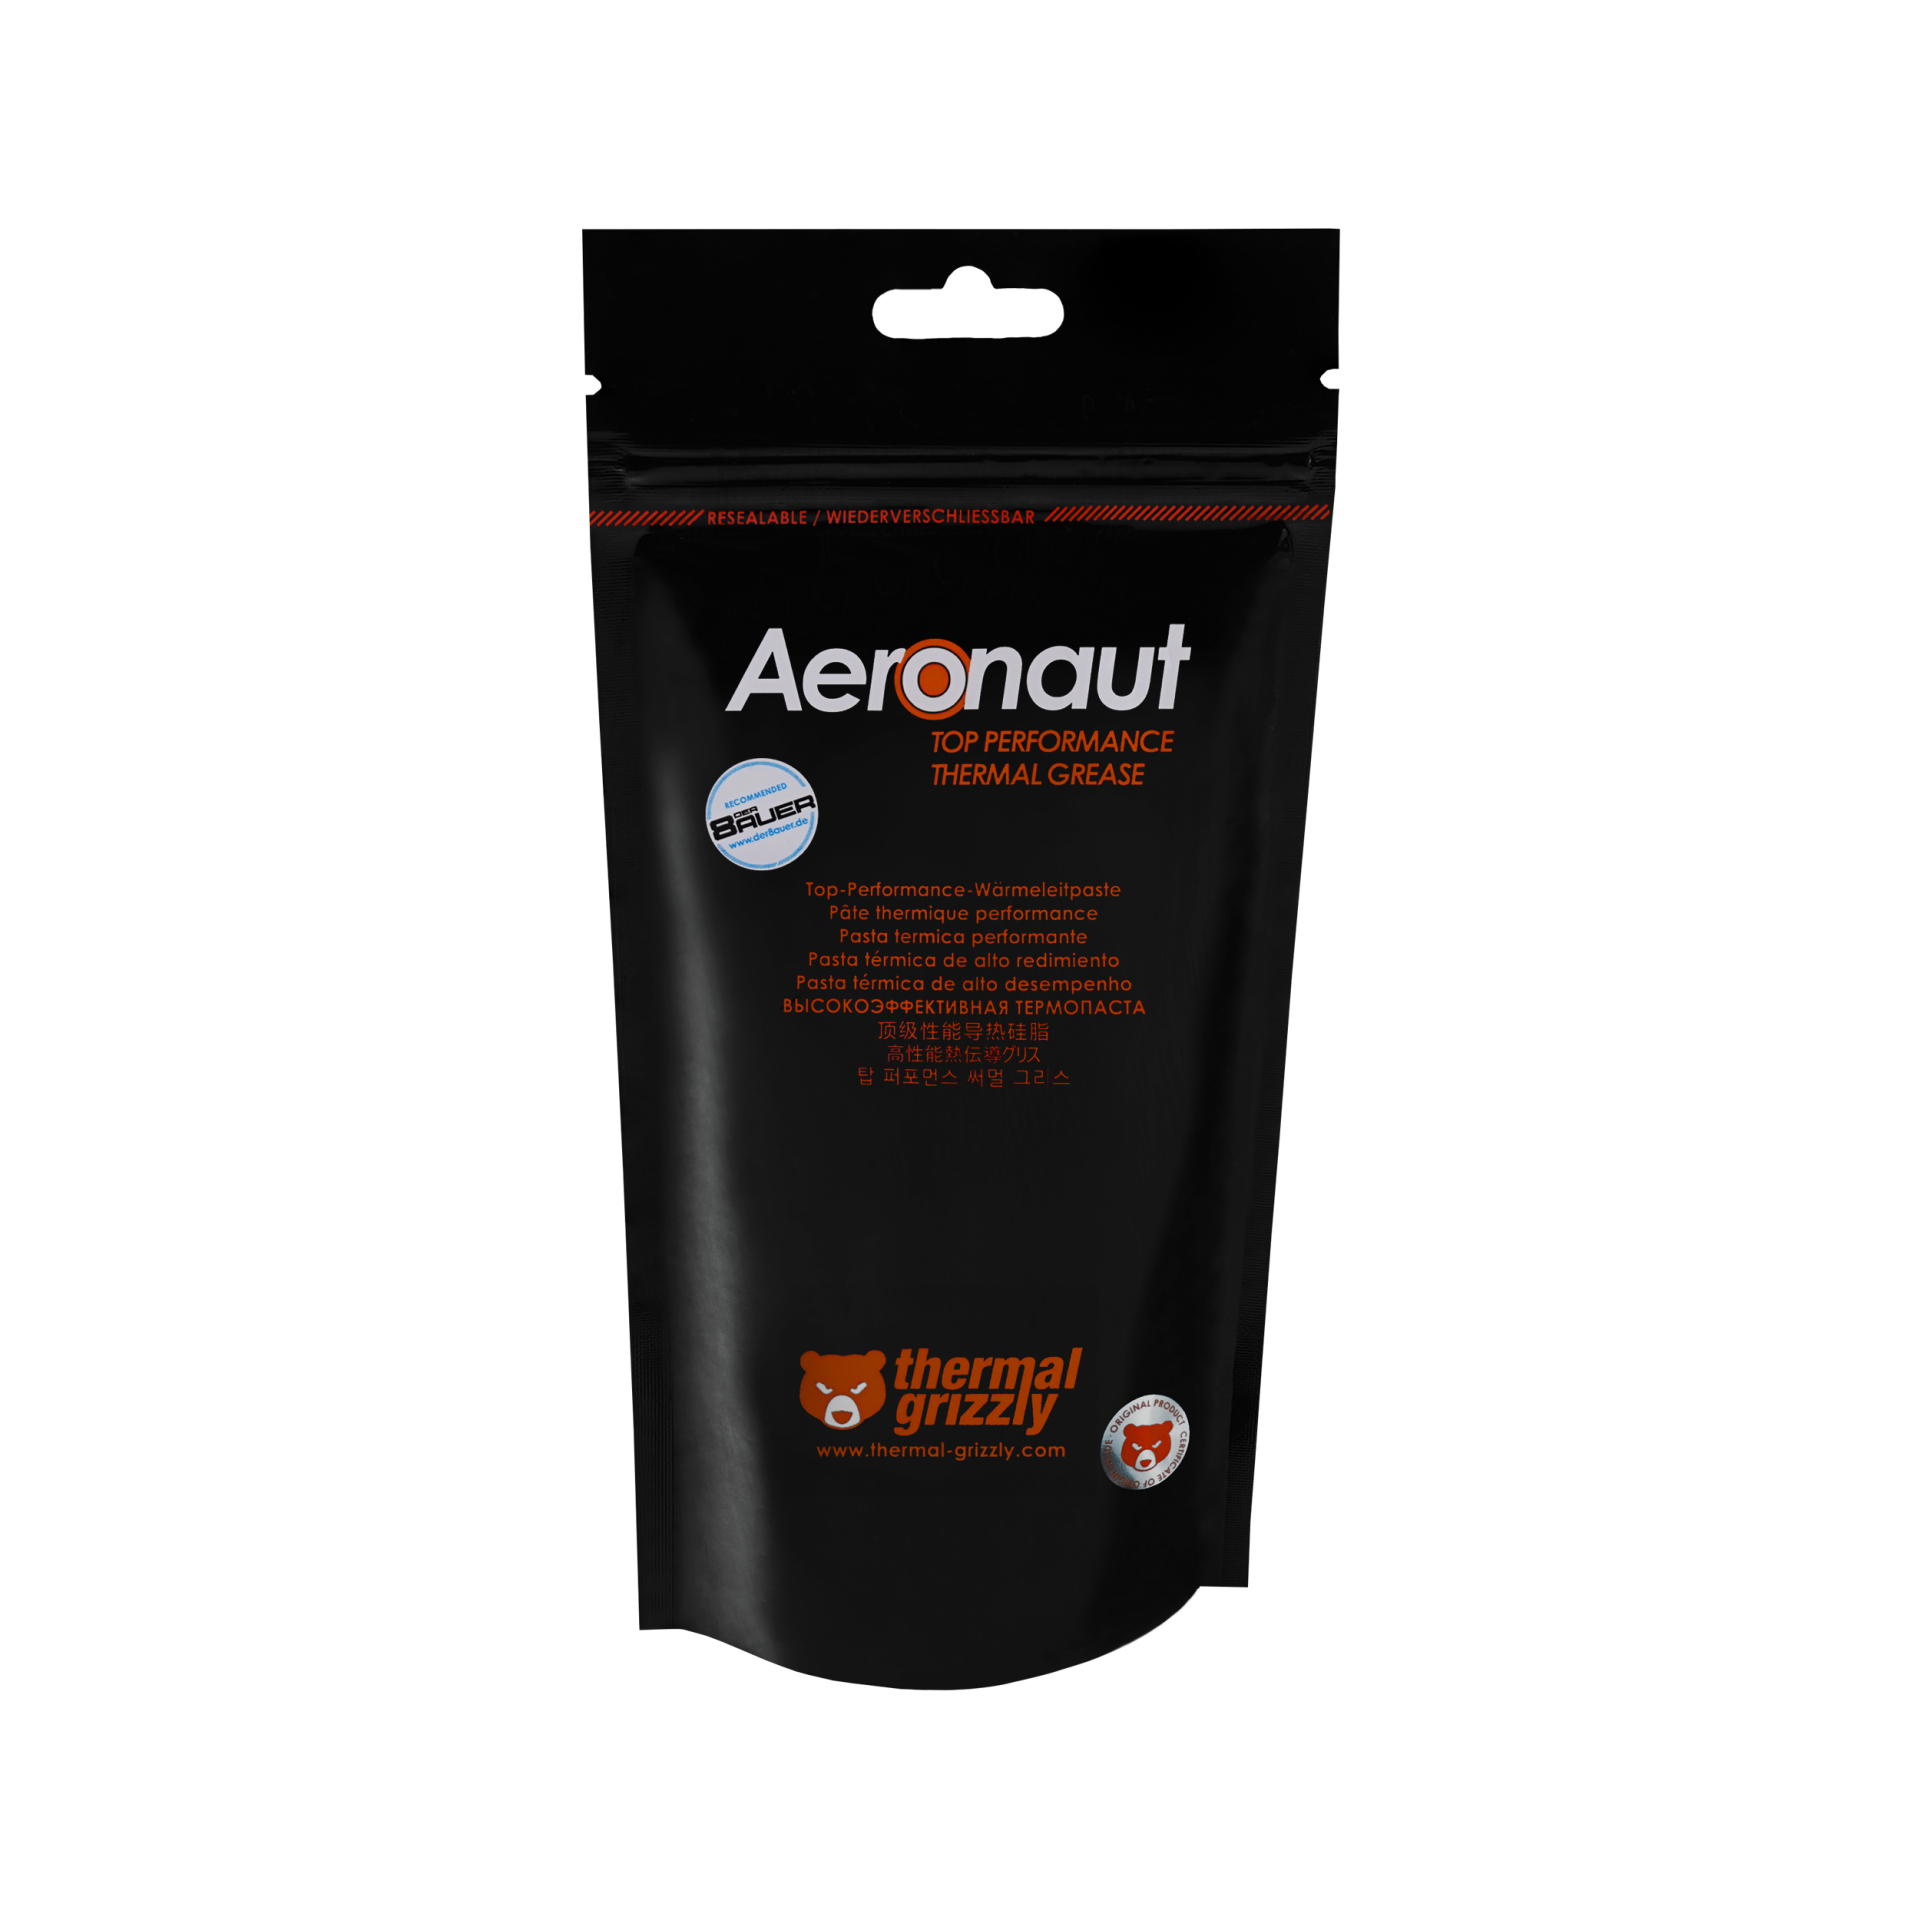 Thermal Grizzly - Pasta Térmica Thermal Grizzly Aeronaut (26g)